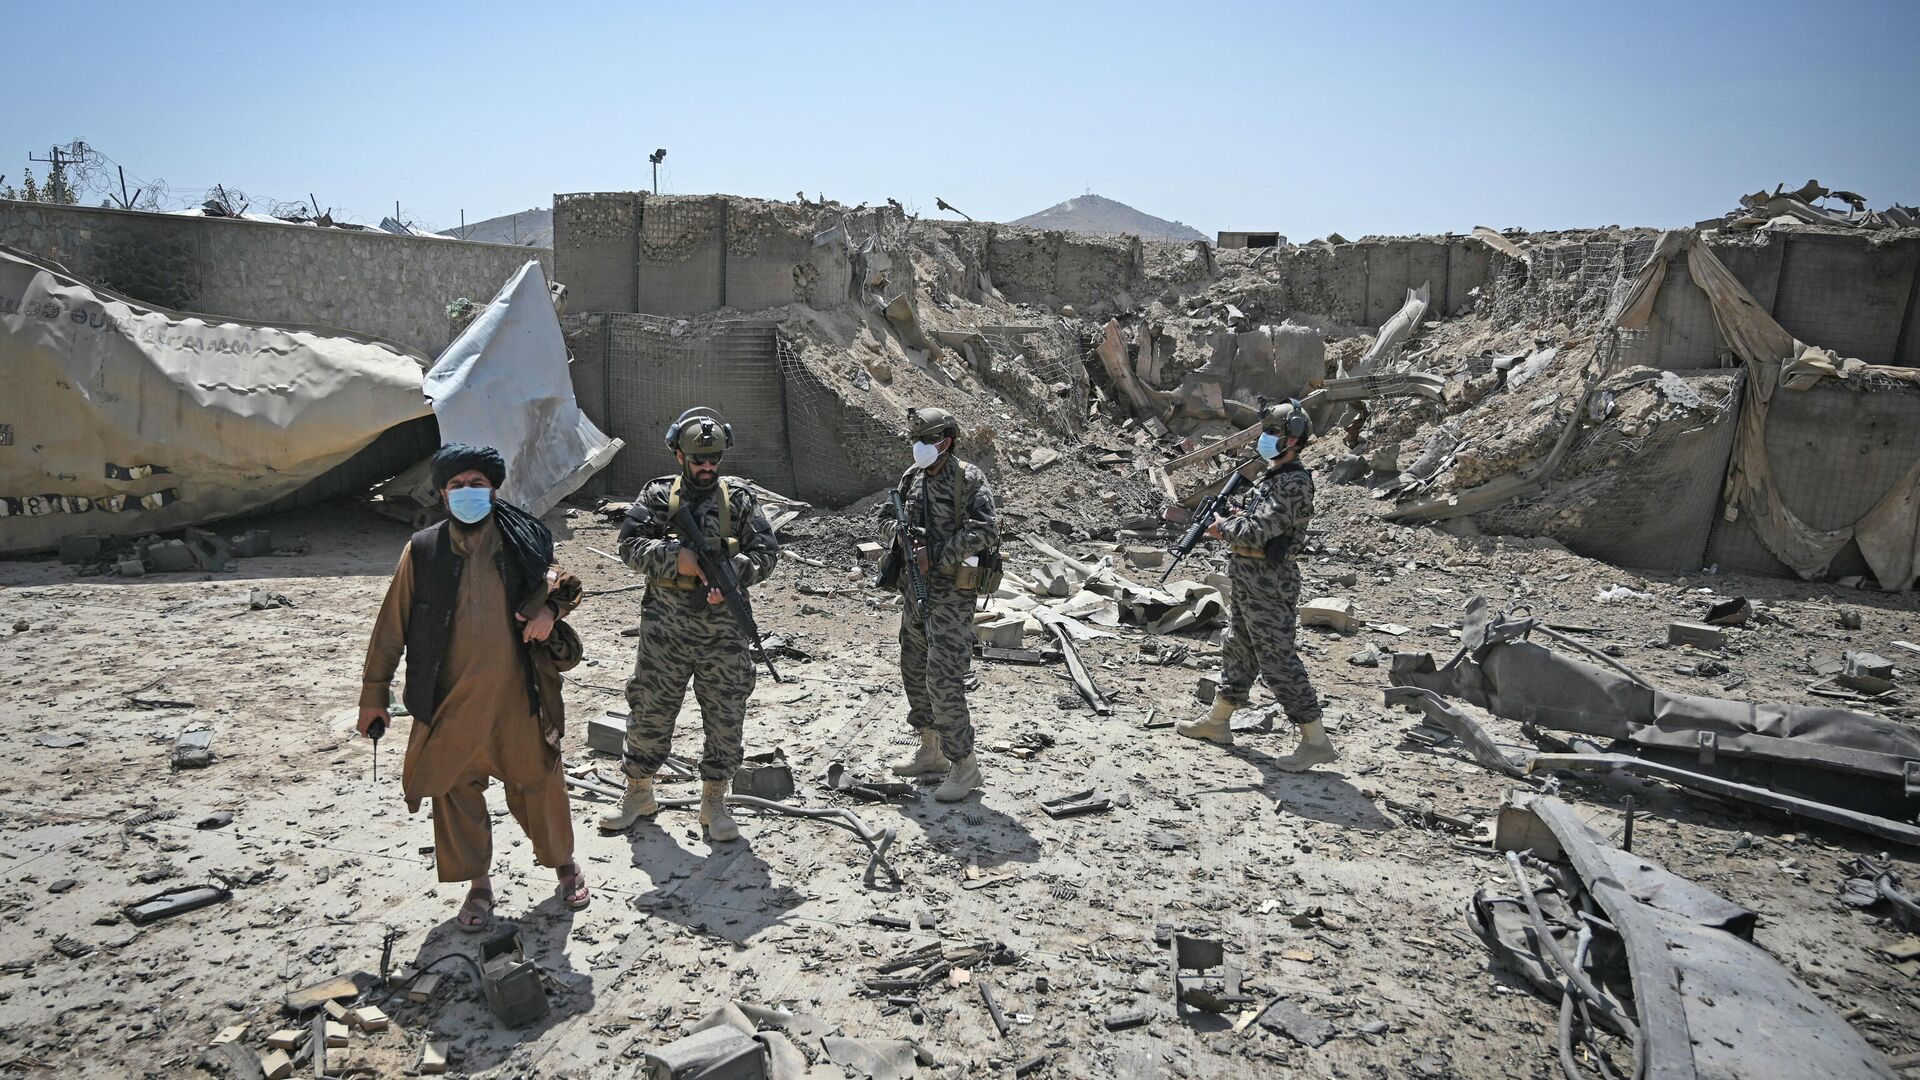 Members of the Taliban Badri 313 military unit stand besides ammunition lying on the ground amid the debris of the destroyed Central Intelligence Agency (CIA) base in Deh Sabz district northeast of Kabul on September 6, 2021 after the US pulled all its troops out of the country - Sputnik International, 1920, 07.09.2021